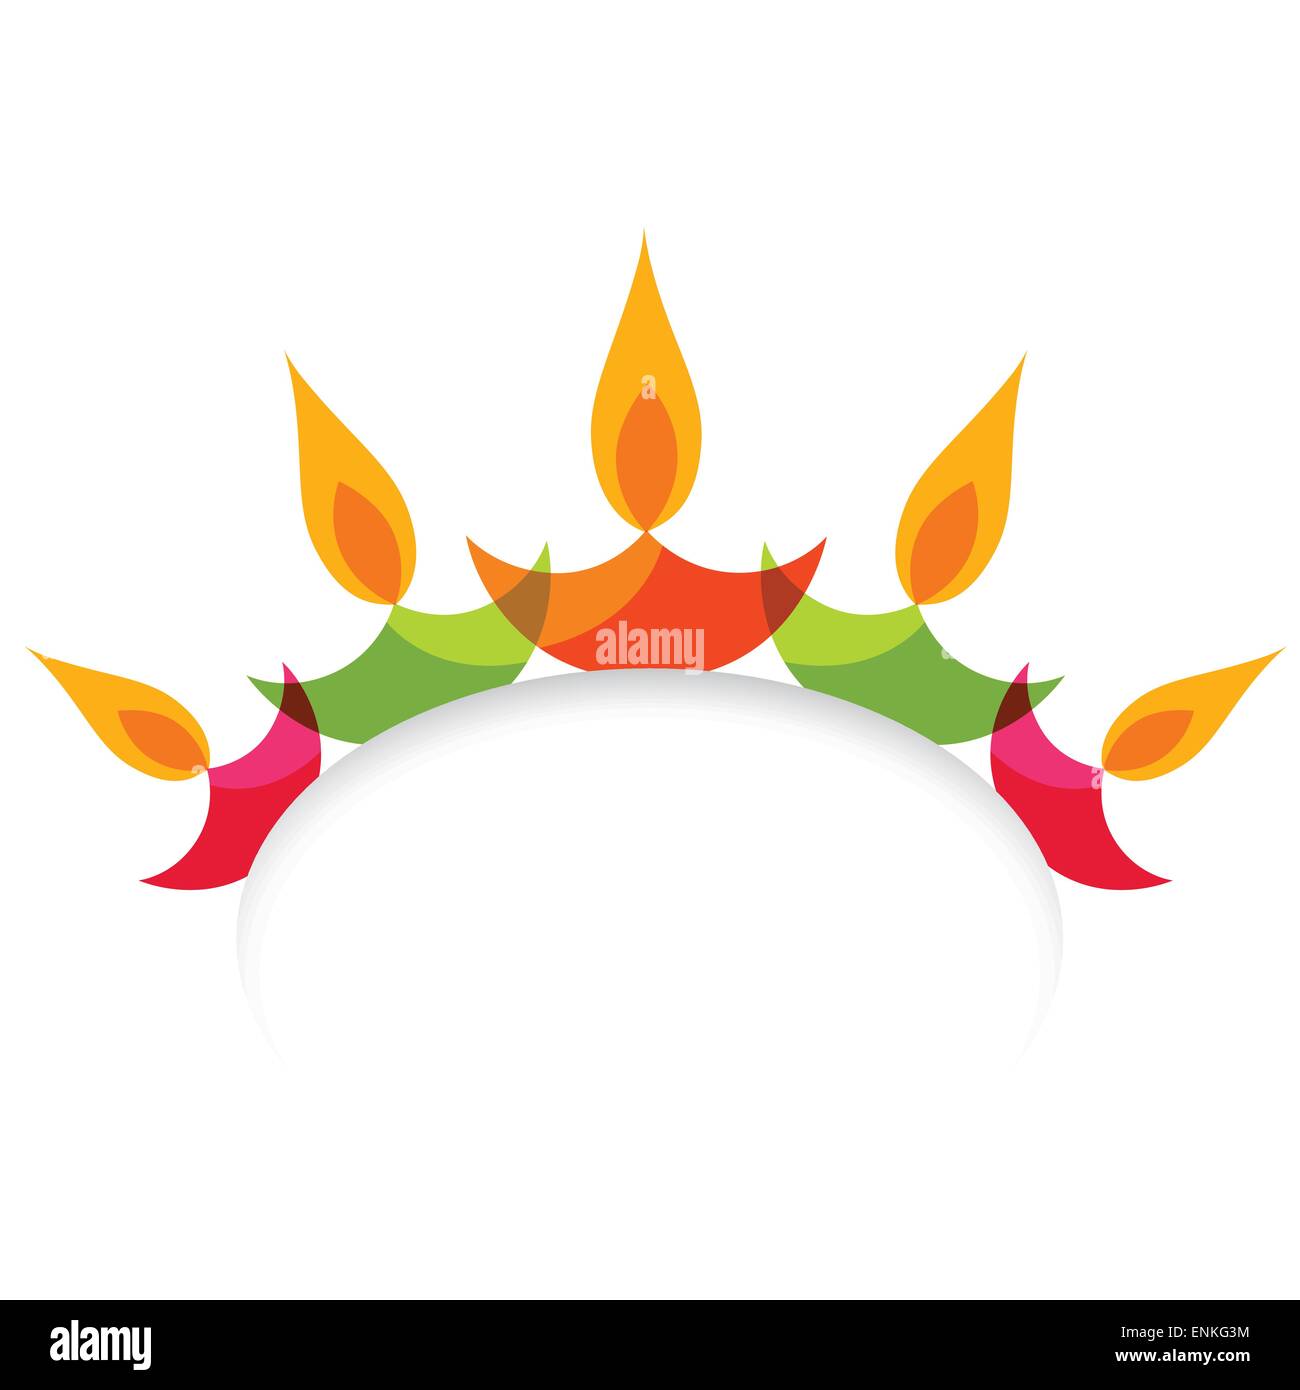 Diwali Background Images  Browse 1059 Stock Photos Vectors and Video   Adobe Stock